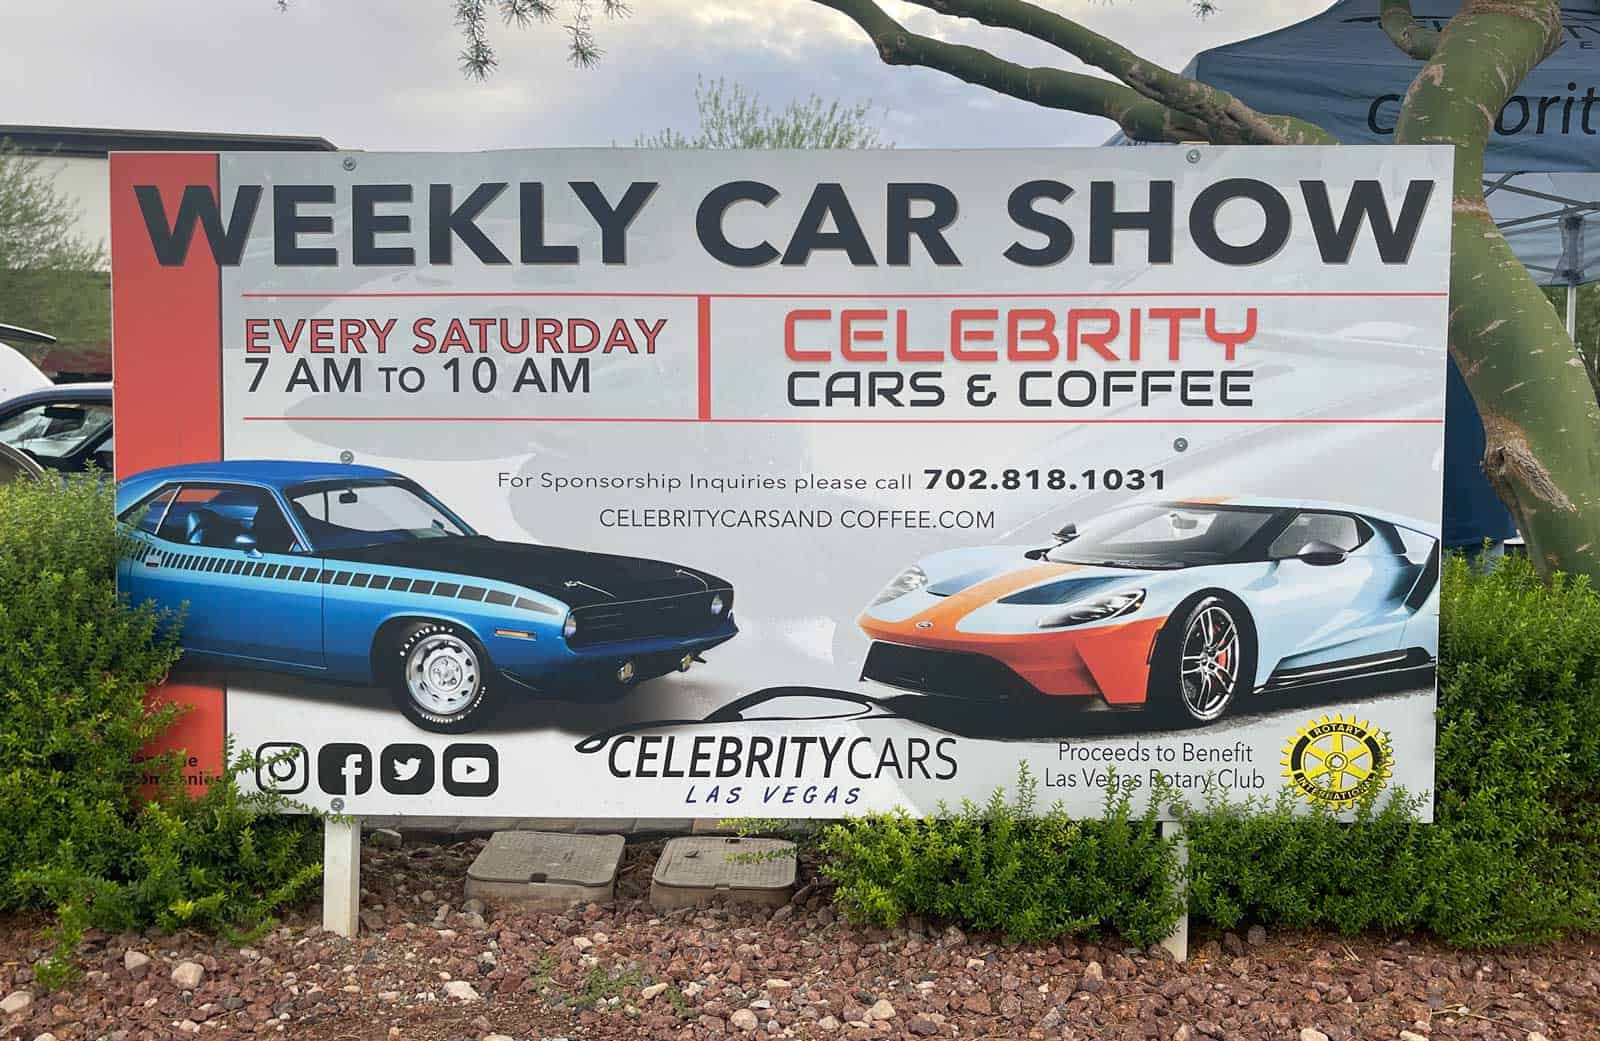 Weekly Car Show at Celebrity Cars & Coffee Las Vegas